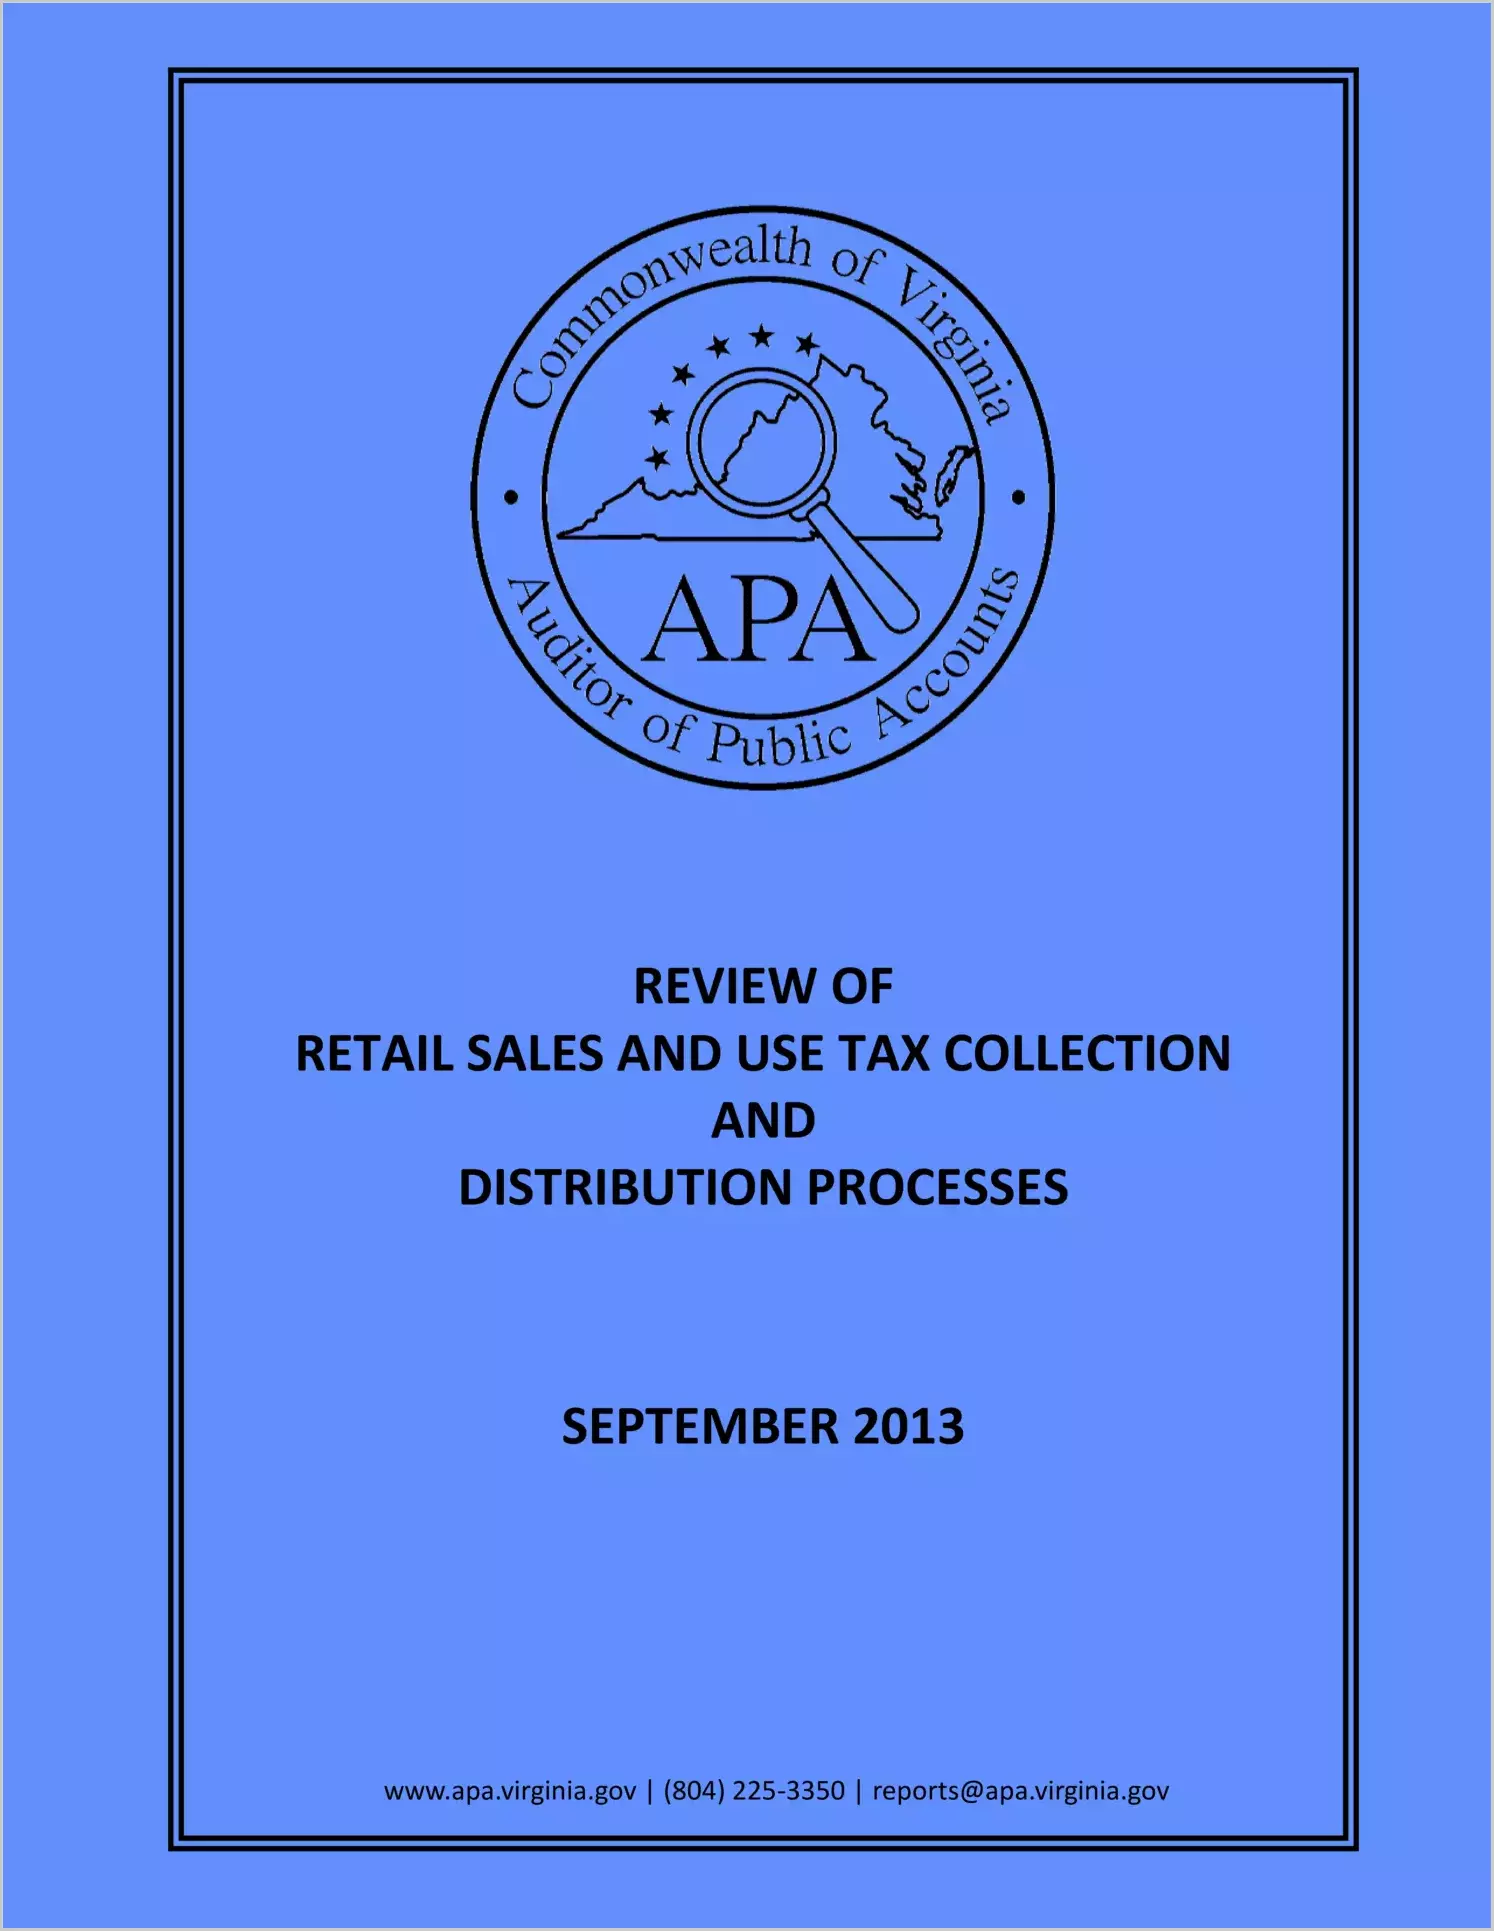 Review of Retail Sales and Use Tax Collection and Distribution Processes as of September 2013